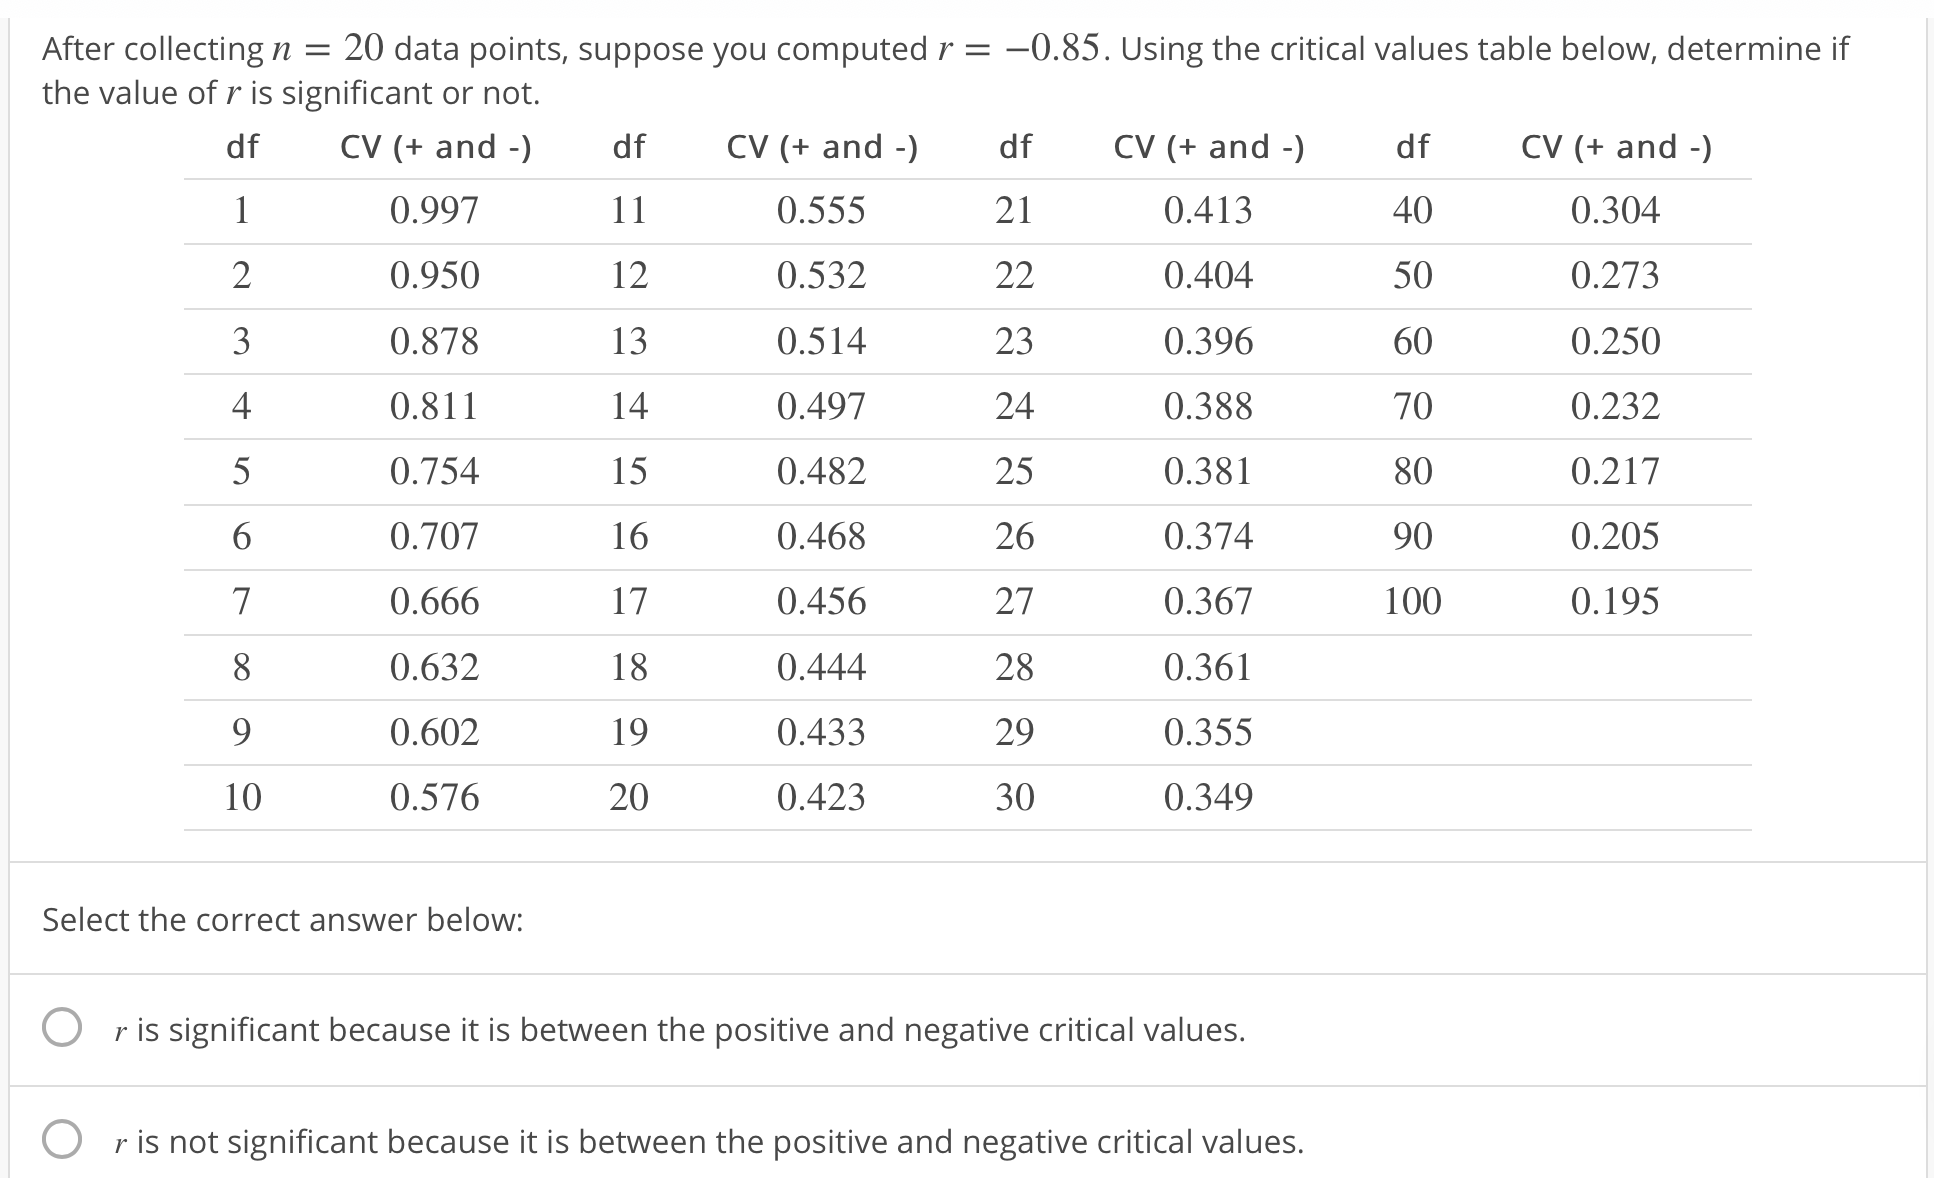 After collecting n = 20 data points, suppose you computed r
the value of r is significant or not.
-0.85. Using the critical values table below, determine if
df CV (+ and
0.997
0.950
0.878
0.811
0.754
0.707
0.666
0.632
0.602
0.576
df CV (+ and - dfCV (+ and -)
df
40
50
60
70
80
90
100
CV (+ and -)
0.304
0.273
0.250
0.232
0.217
0.205
0.195
0.555
0.532
0.514
0.497
0.482
0.468
0.456
0.444
0.433
0.423
0.413
0.404
0.396
0.388
0.381
0.374
0.367
0.361
0.355
0.349
2
3
4
23
24
25
26
27
28
29
30
13
15
16
17
18
19
20
10
Select the correct answer below:
O
r is significant because it is between the positive and negative critical values
r is not significant because it is between the positive and negative critical values.
